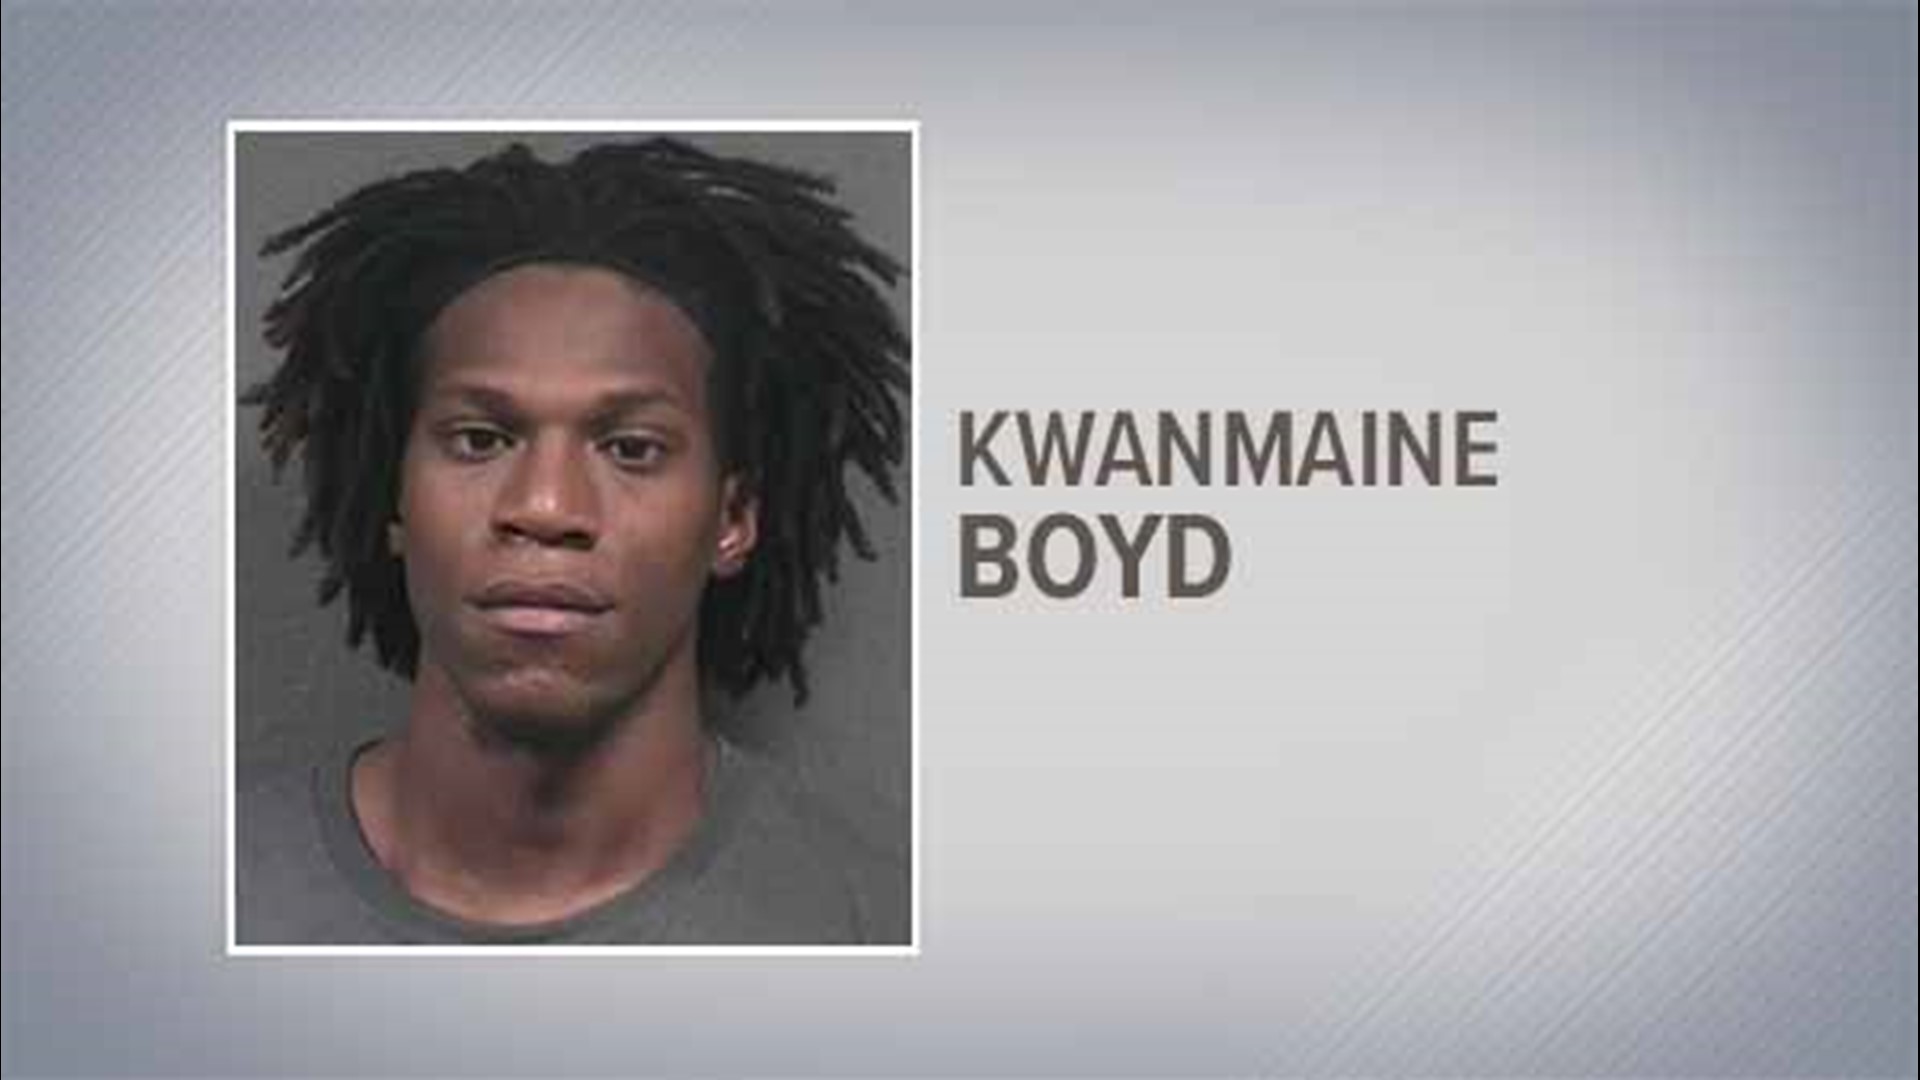 25-year-old Kwanmaine Boyd has been charged with capital murder. Police said he shot 25-year-old Cavanna Smith to death in the middle of Reid Street on Oct. 6.